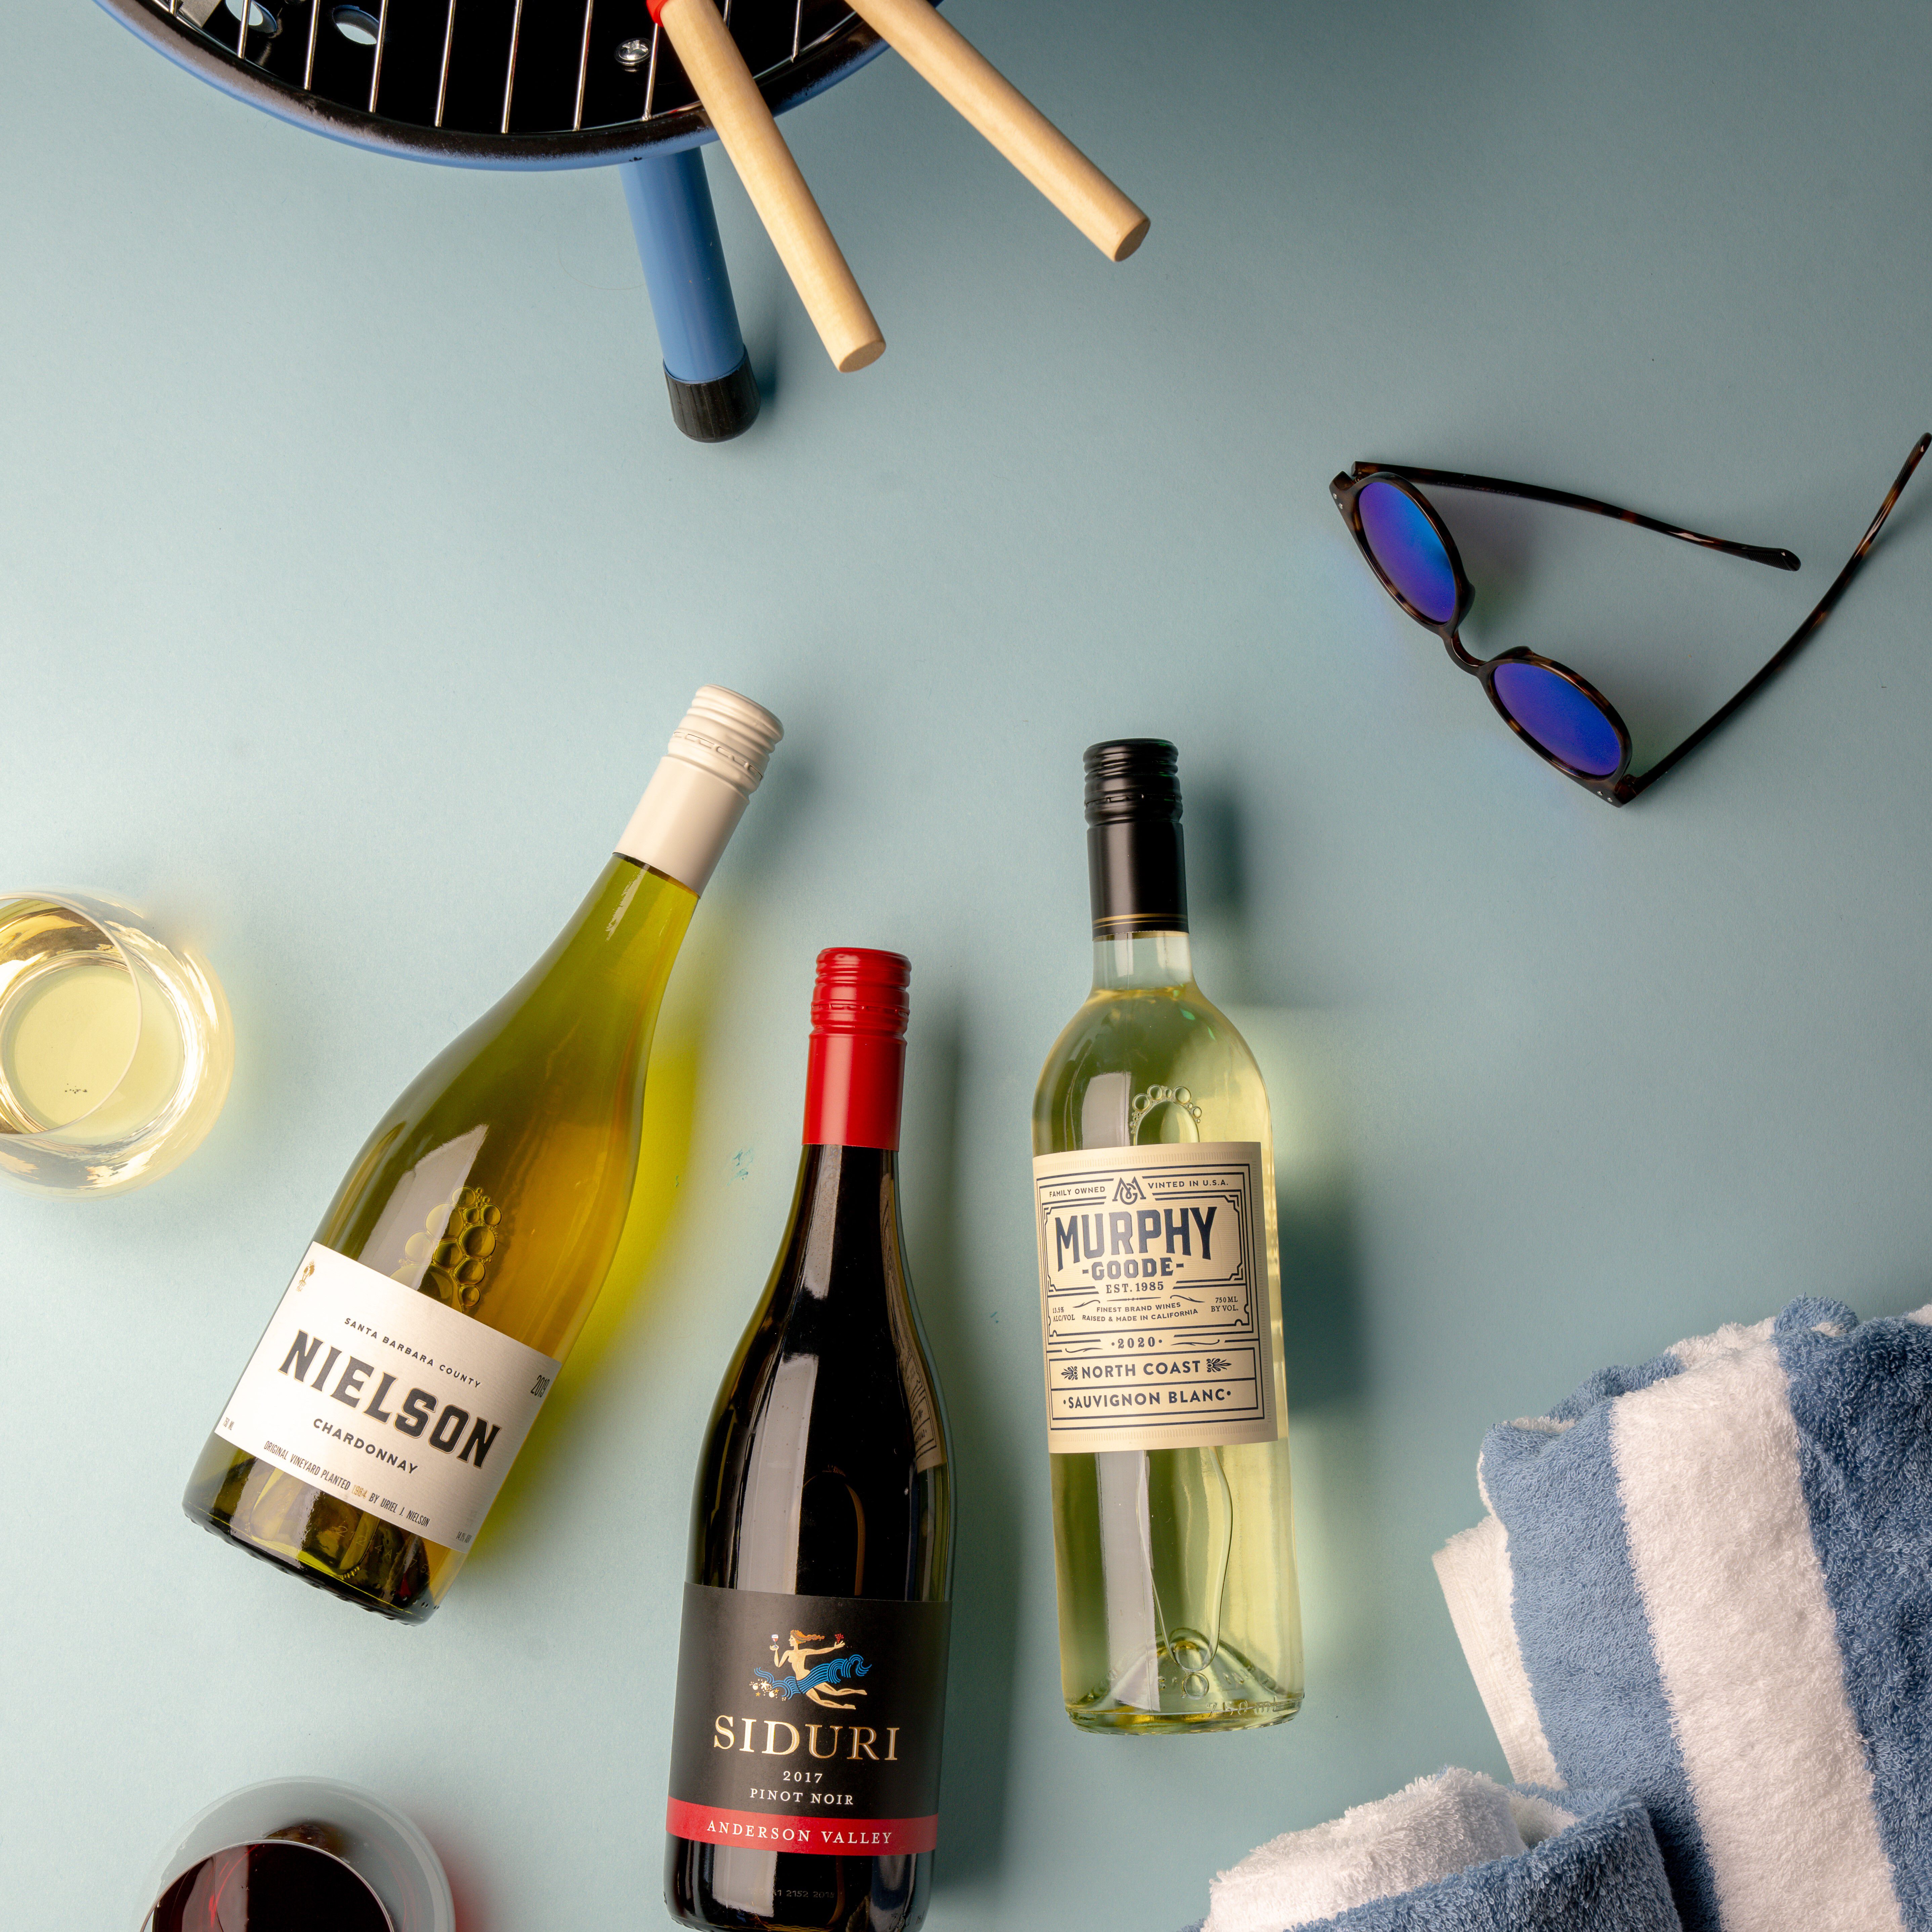 Three wines with towel and sunglasses.